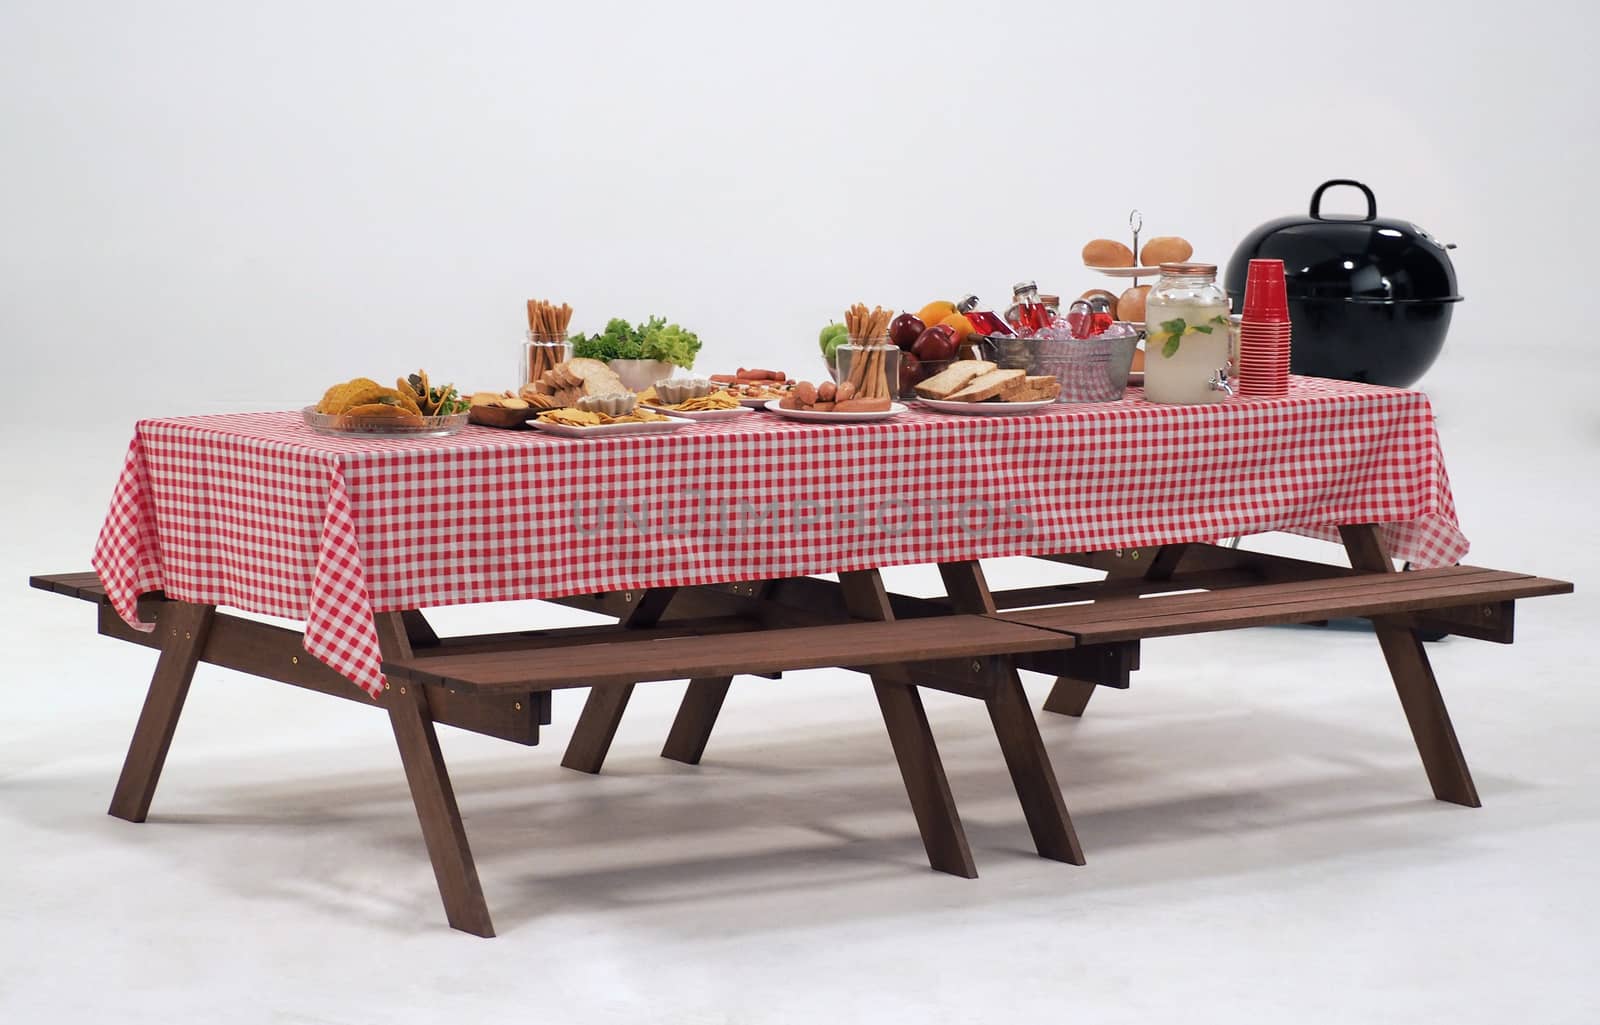 Wood table and red napkin cover for outdoor party by gnepphoto